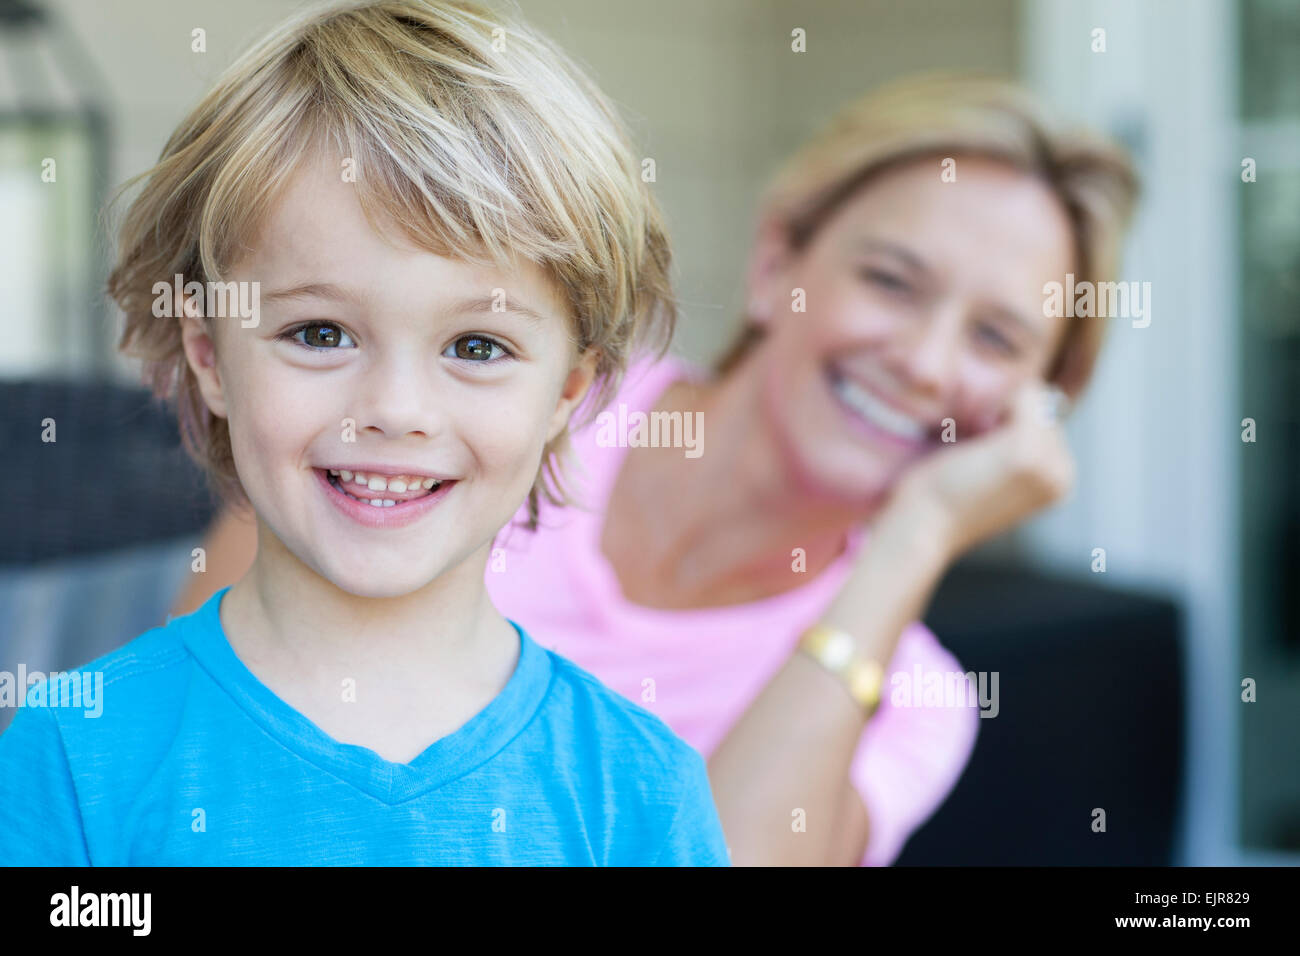 Caucasian boy smiling with mother Stock Photo